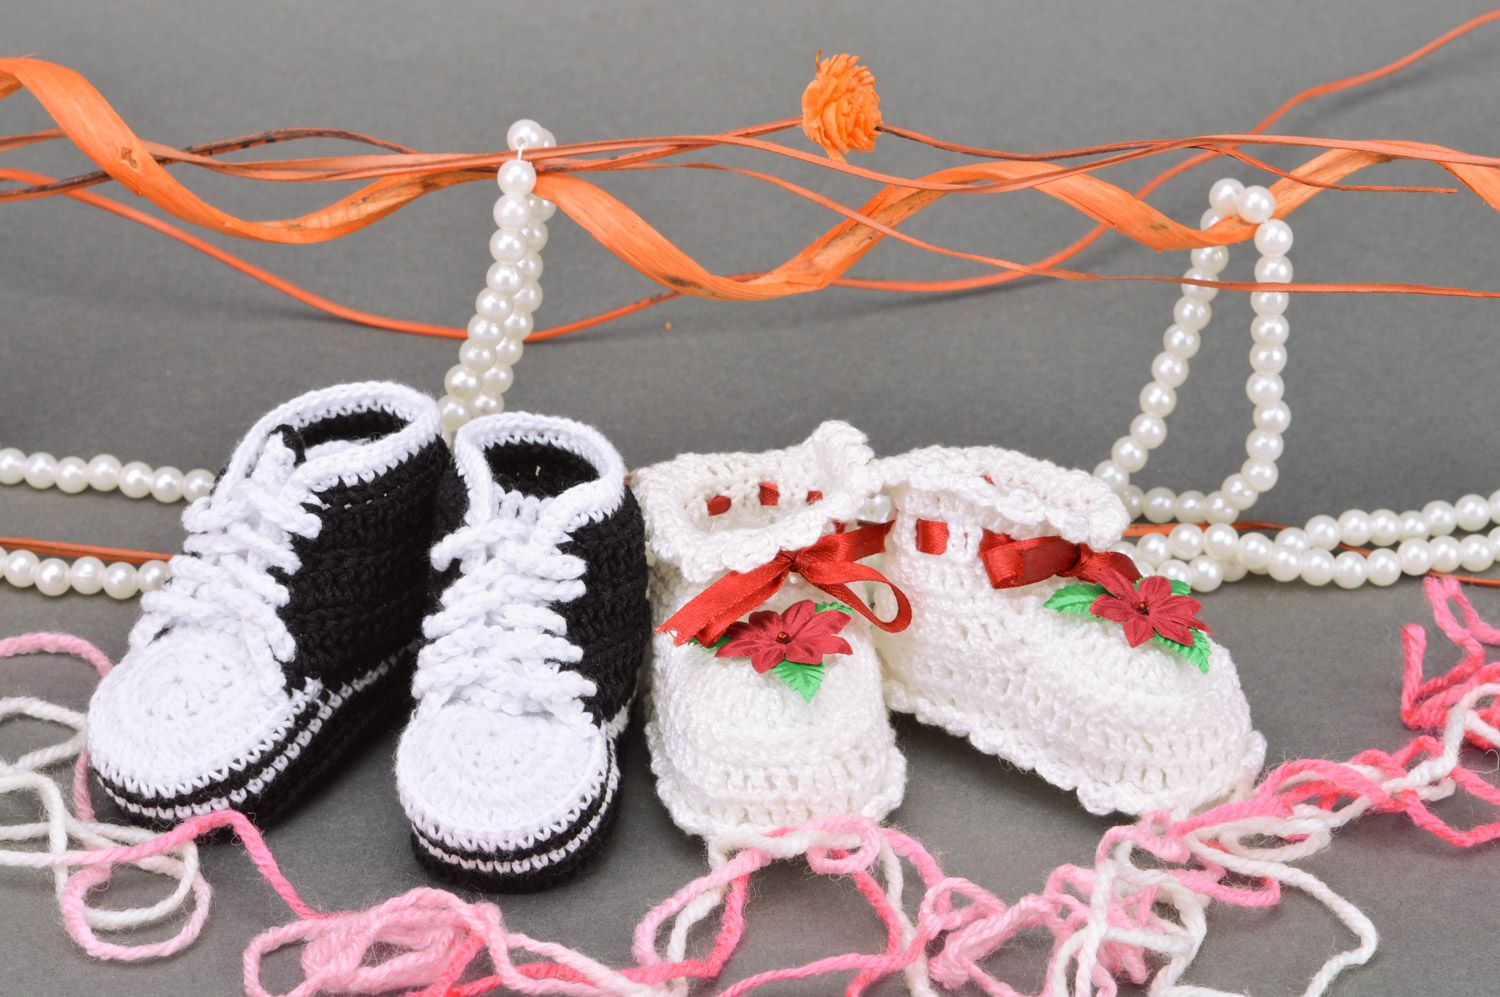 Handmade crocheted set of baby booties for boy and girl made of natural cotton photo 1